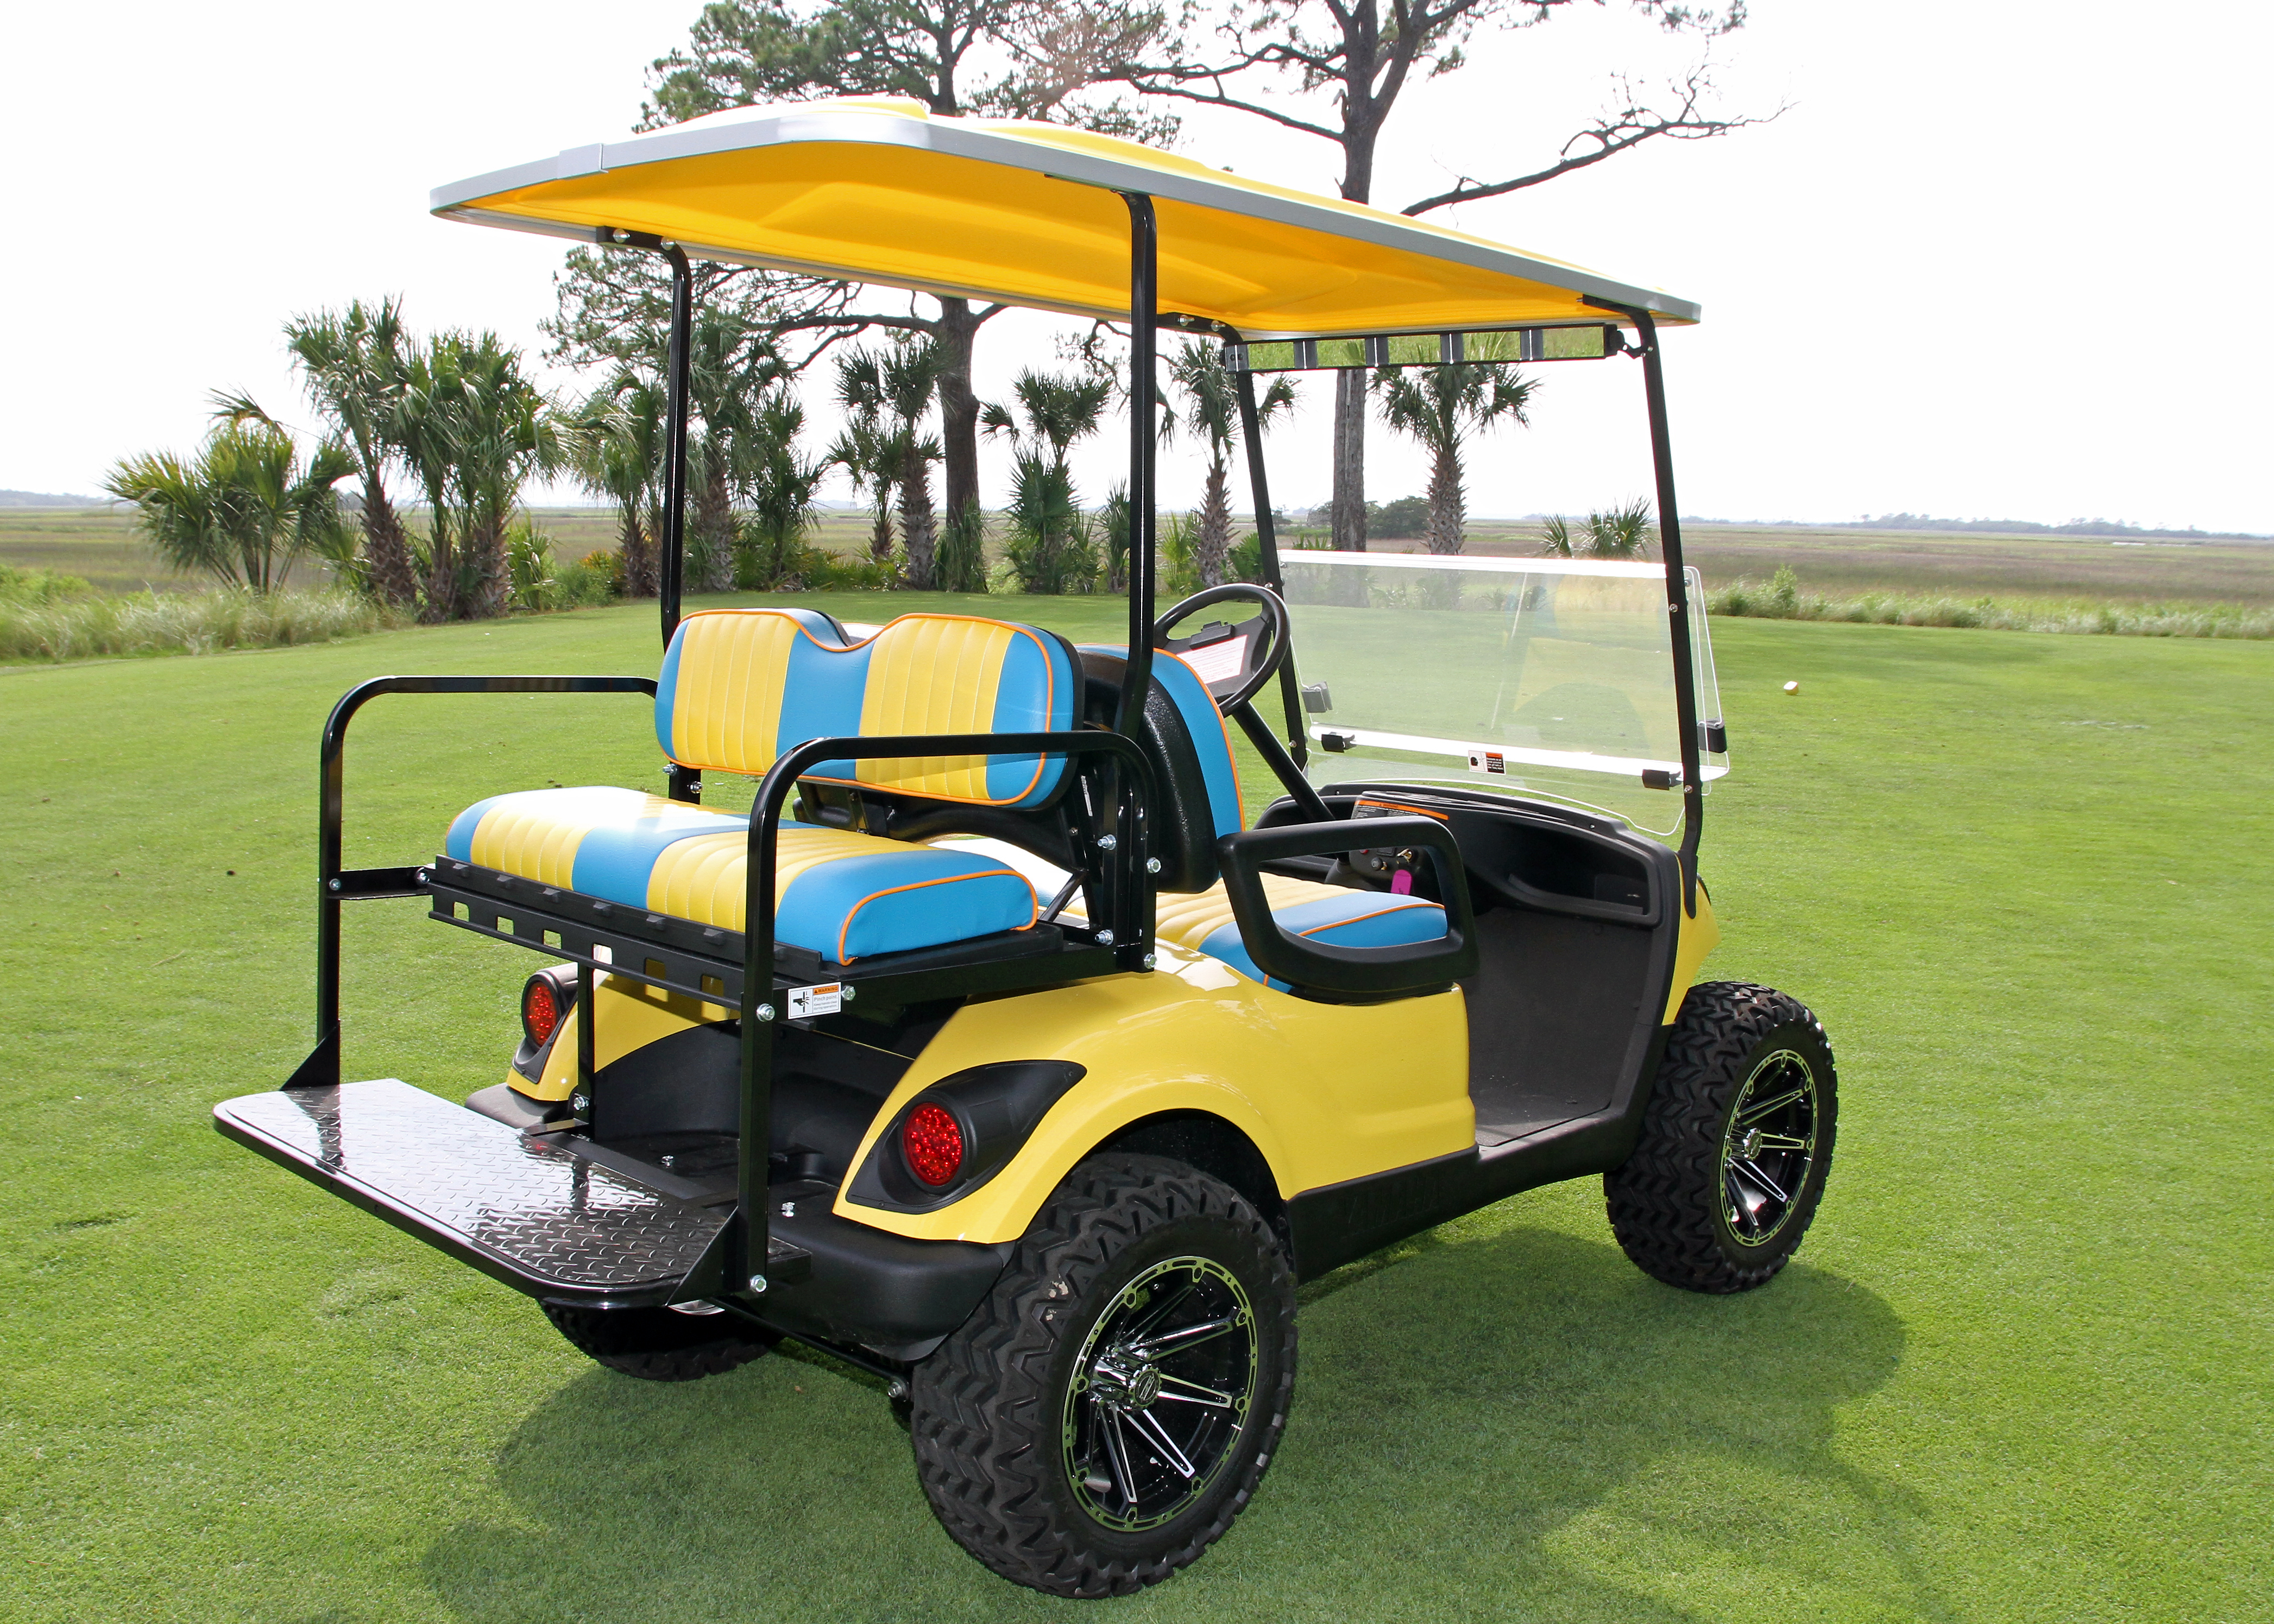 Island Golf Cart Rentals is a locally owned and run business on Fripp Islan...